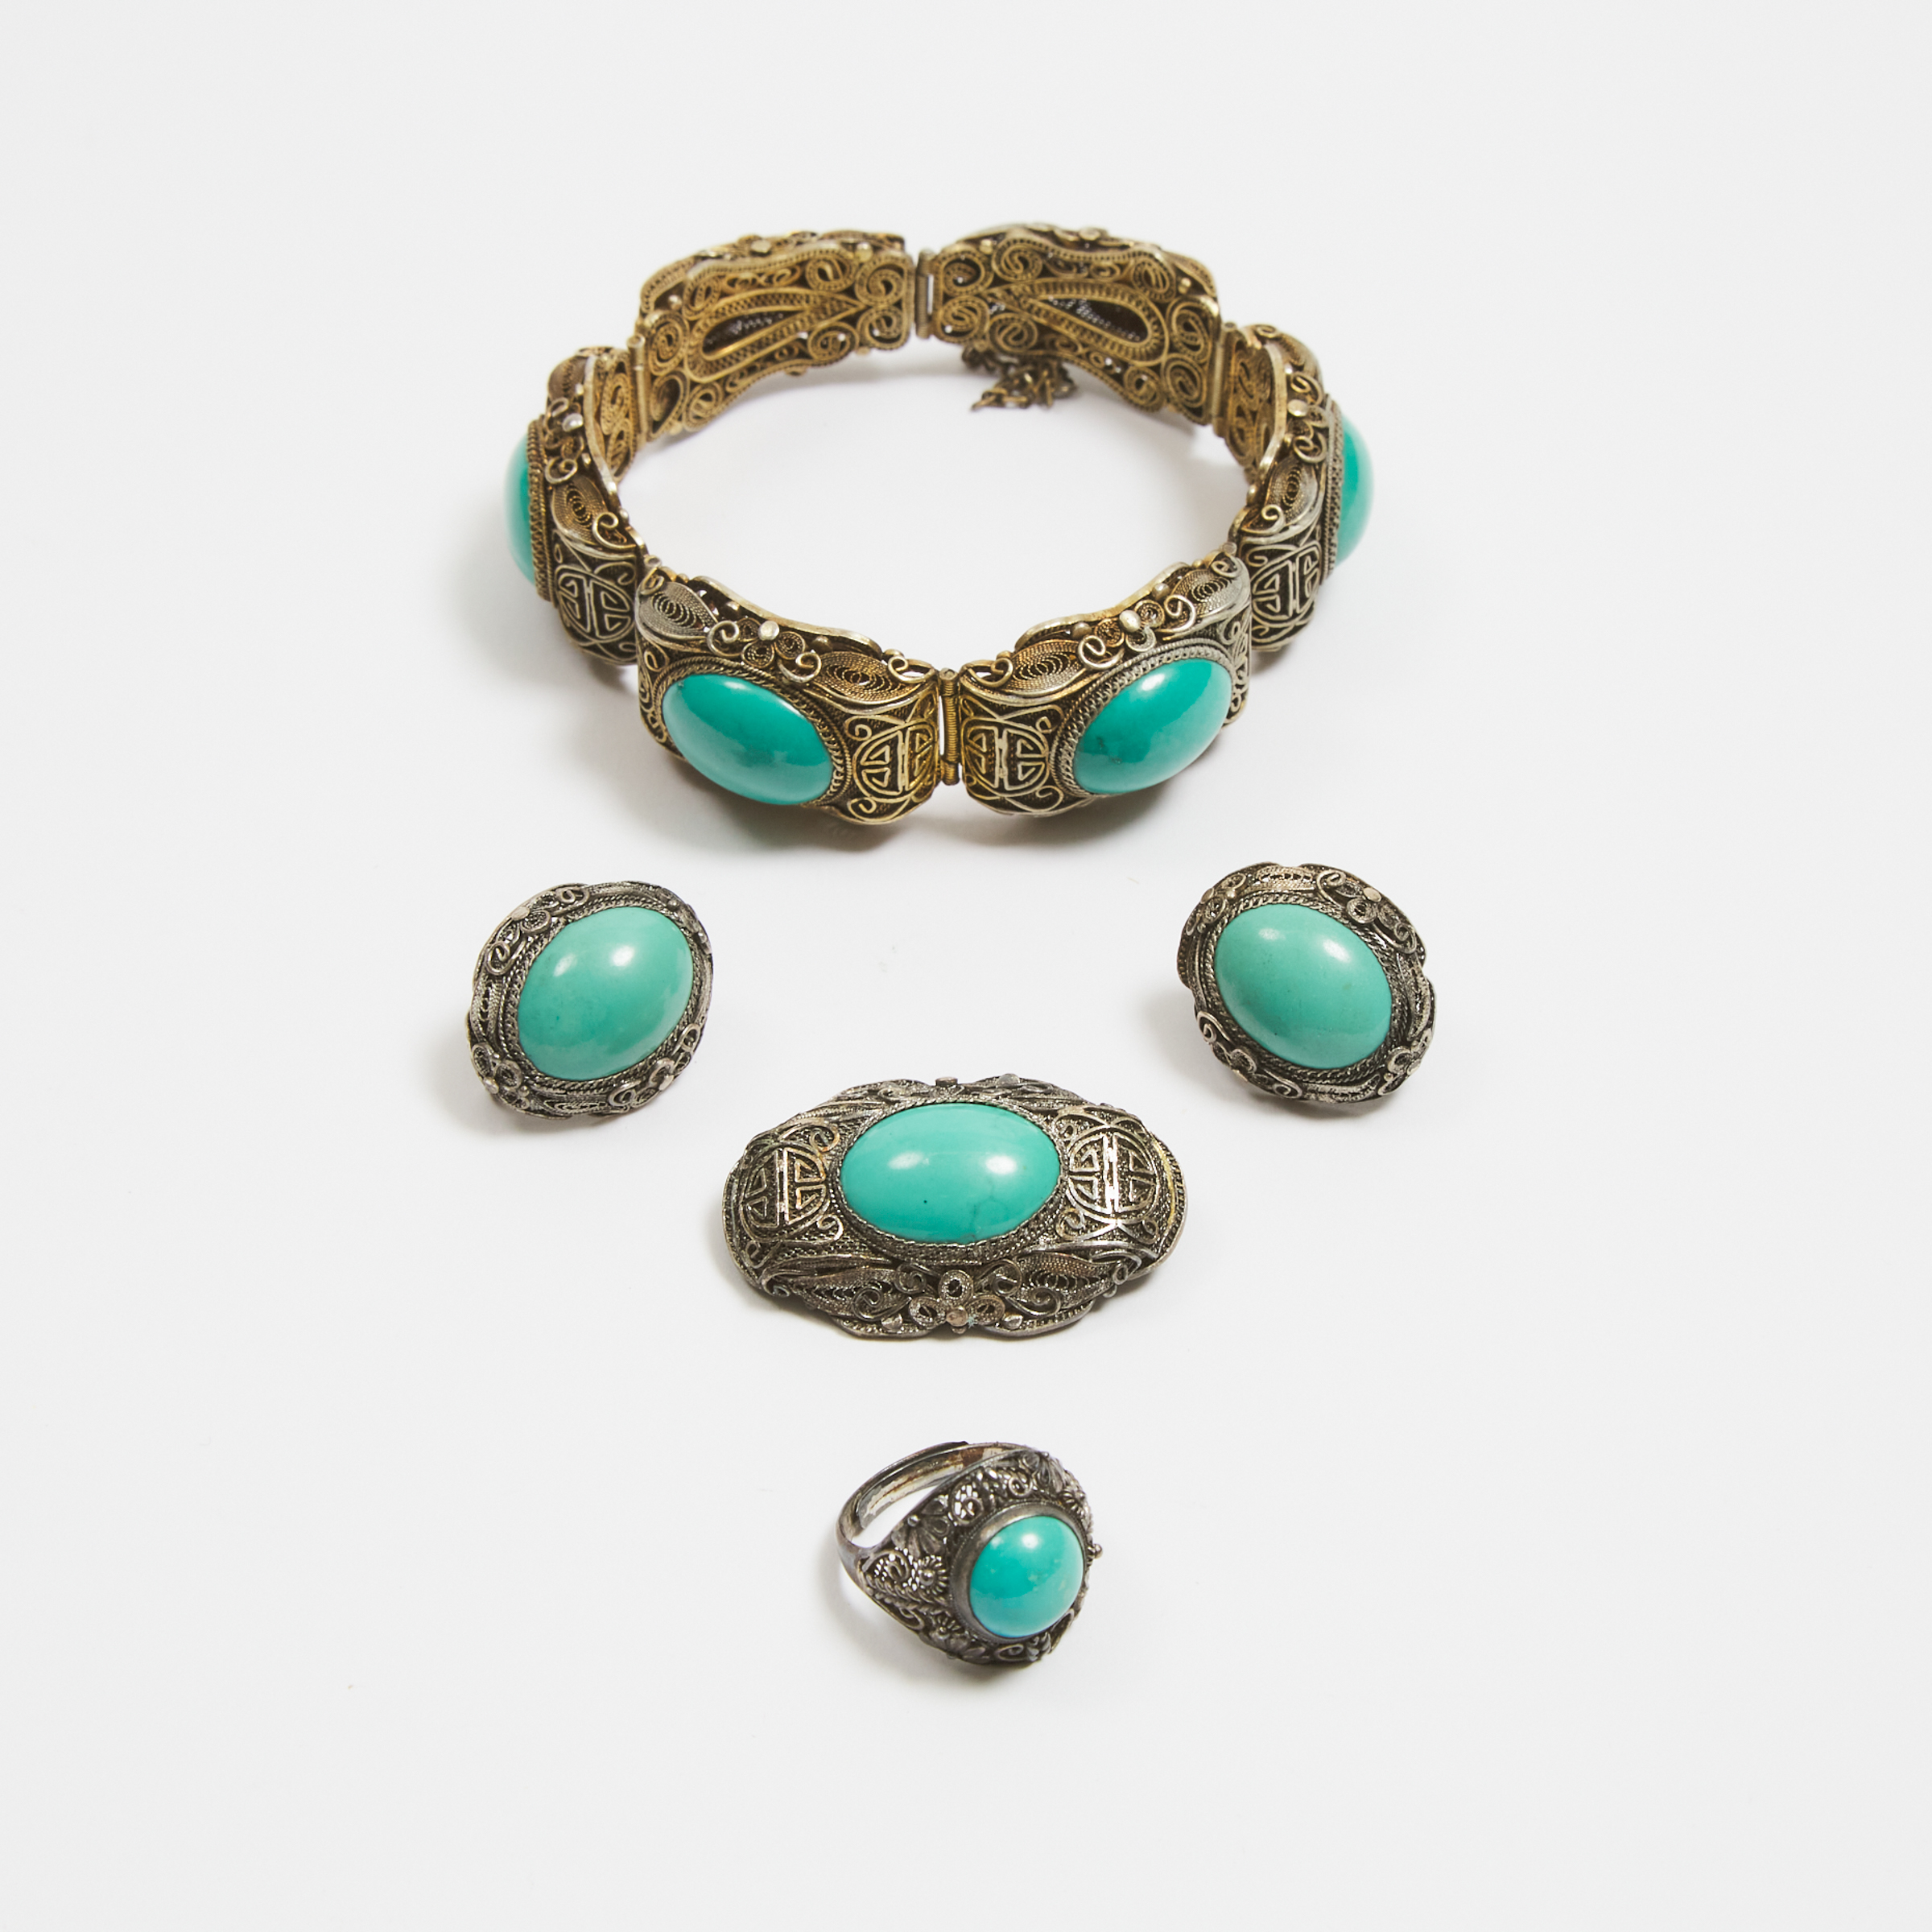 A Set of Five Chinese Silver-Gilt Filigree and Turquoise-Inlaid Jewellery Set, Republican Period